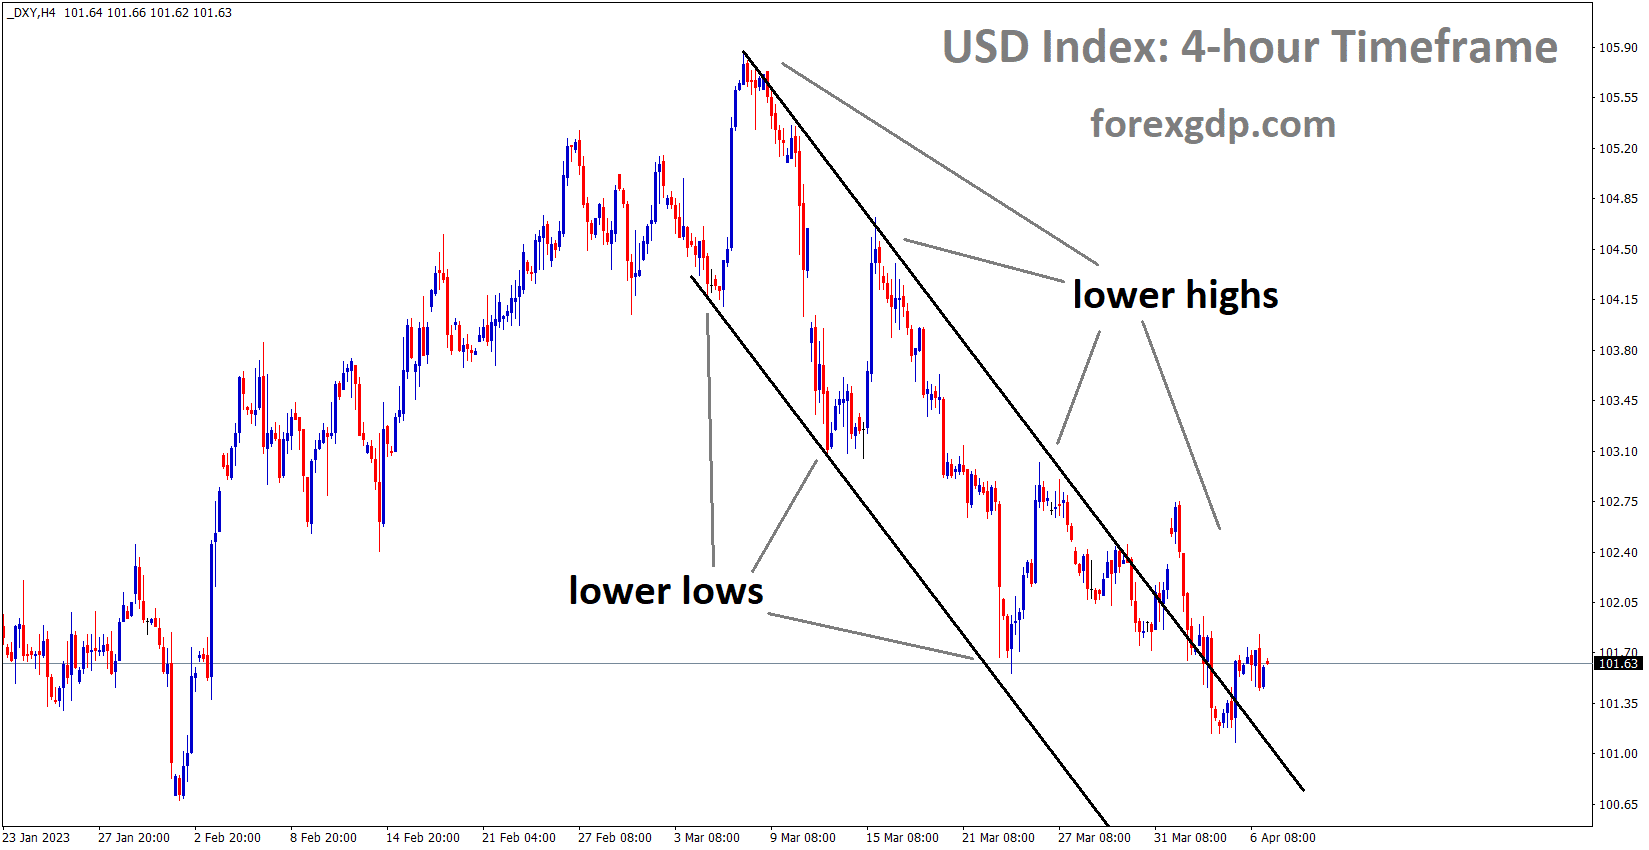 DXY US Dollar index is moving in the Descending channel and the market has reached the lower high area of the channel 1